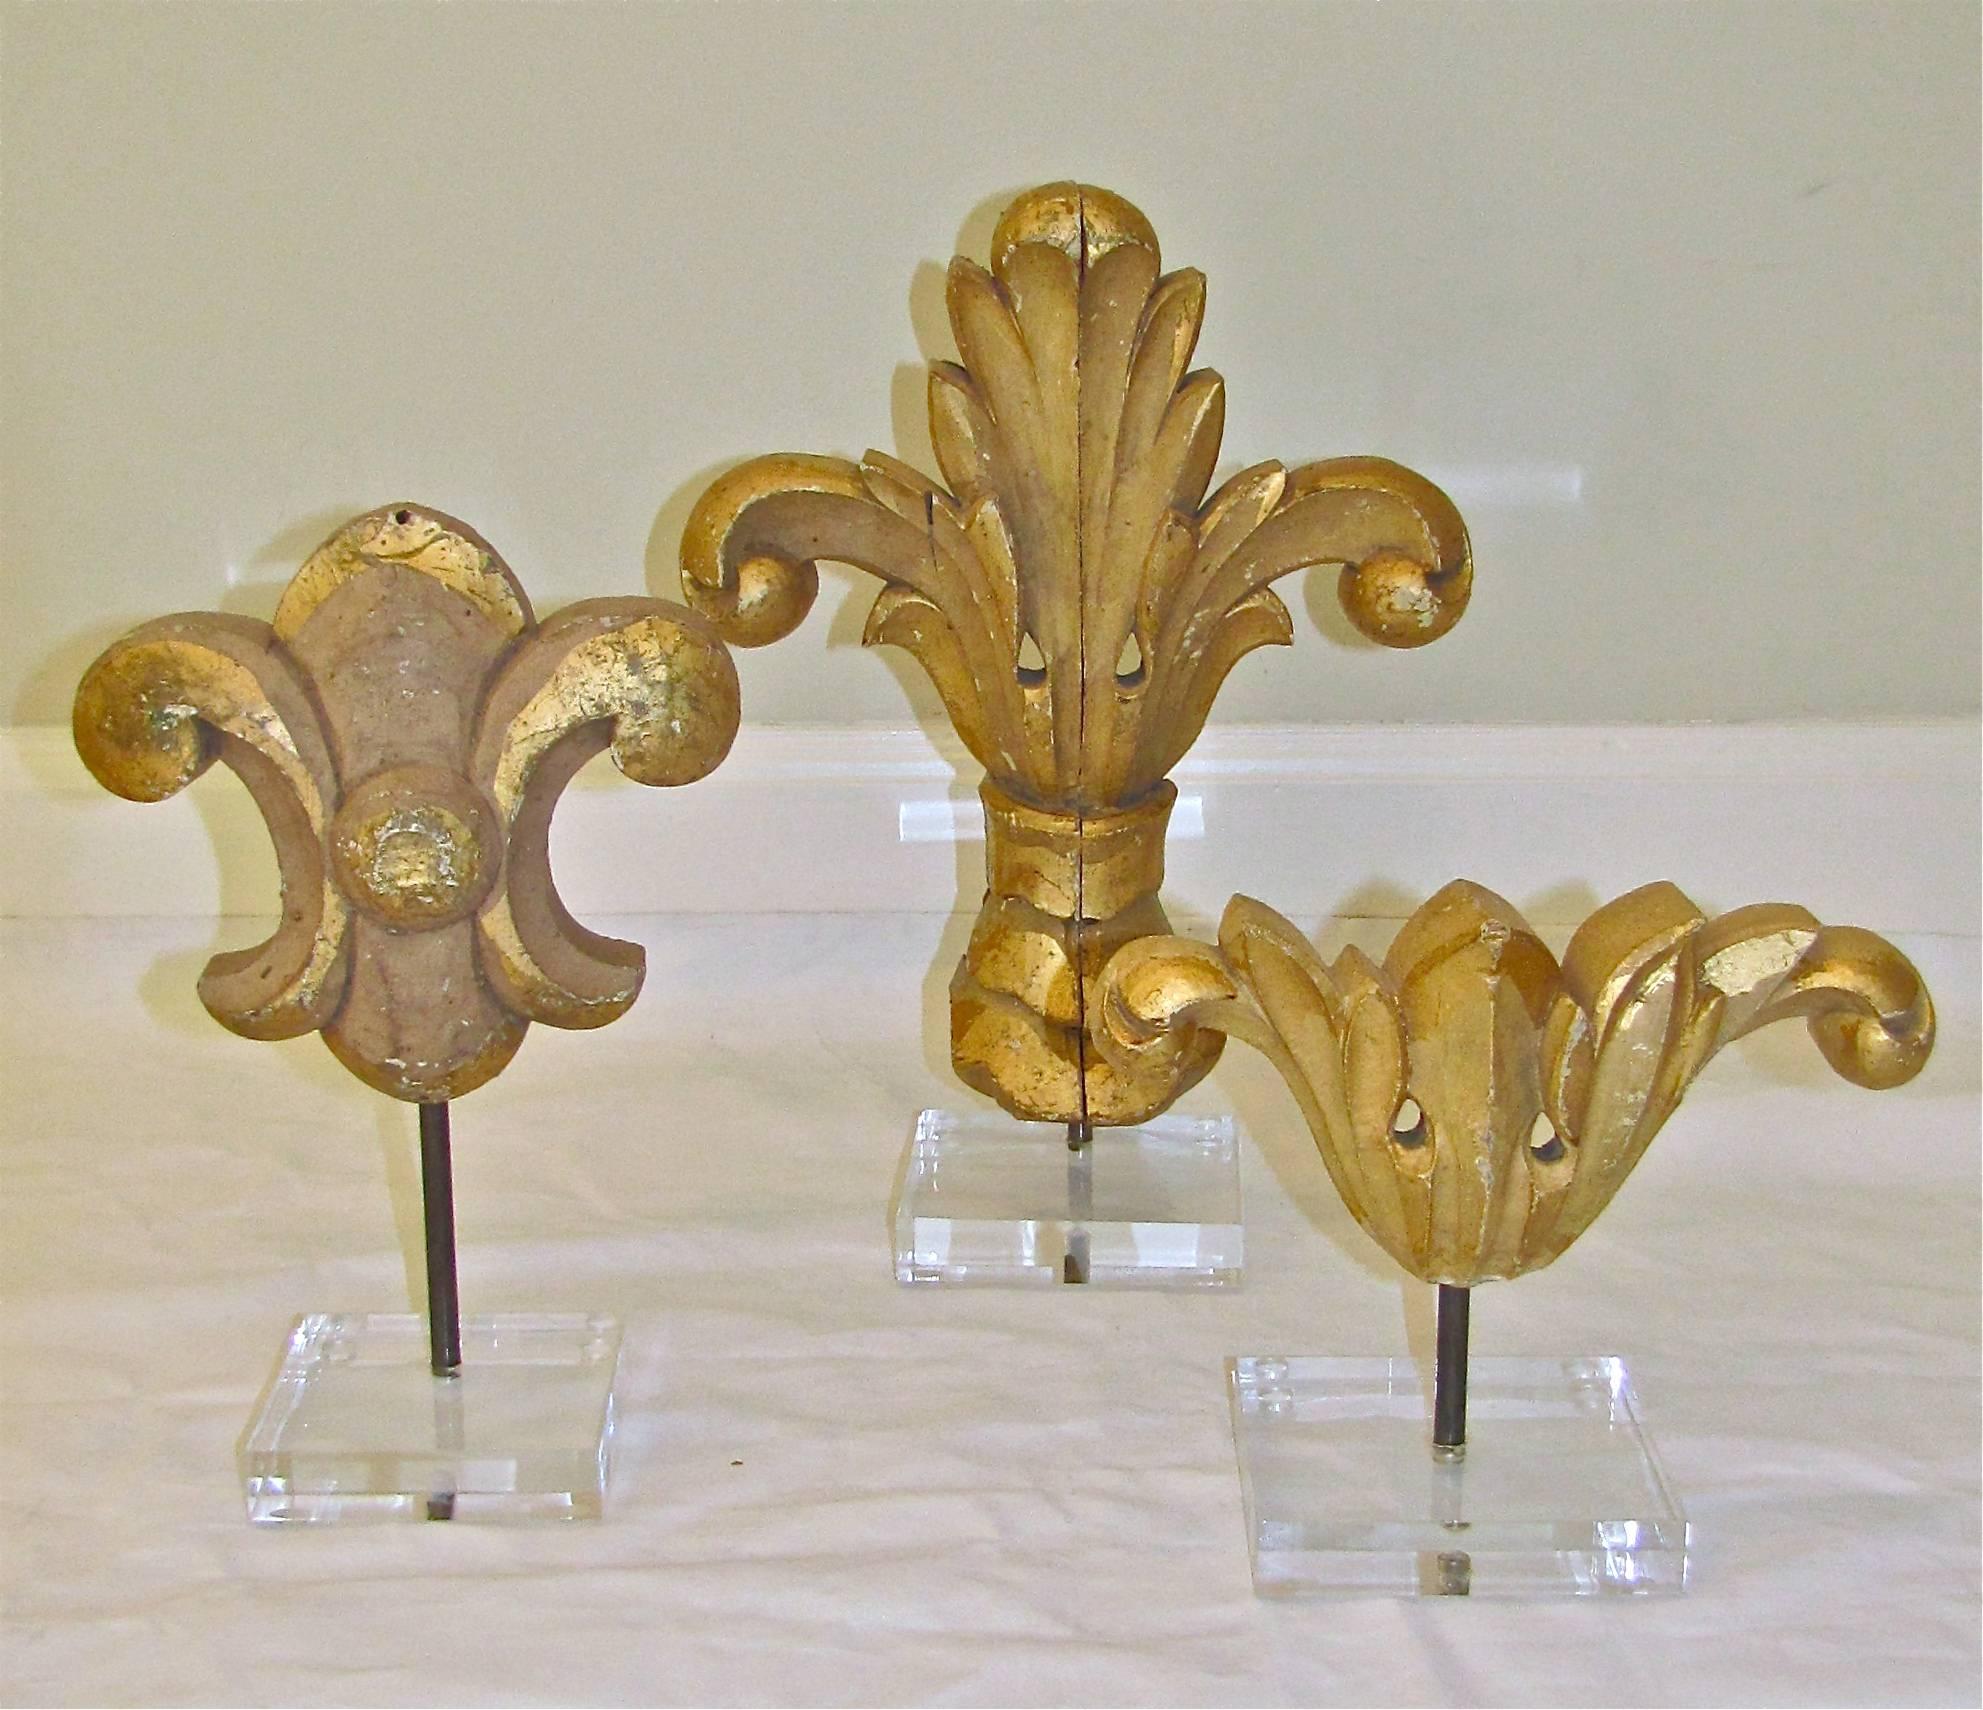 Architectural Carved Wood Fragments Mounted Acrylic Stands 3